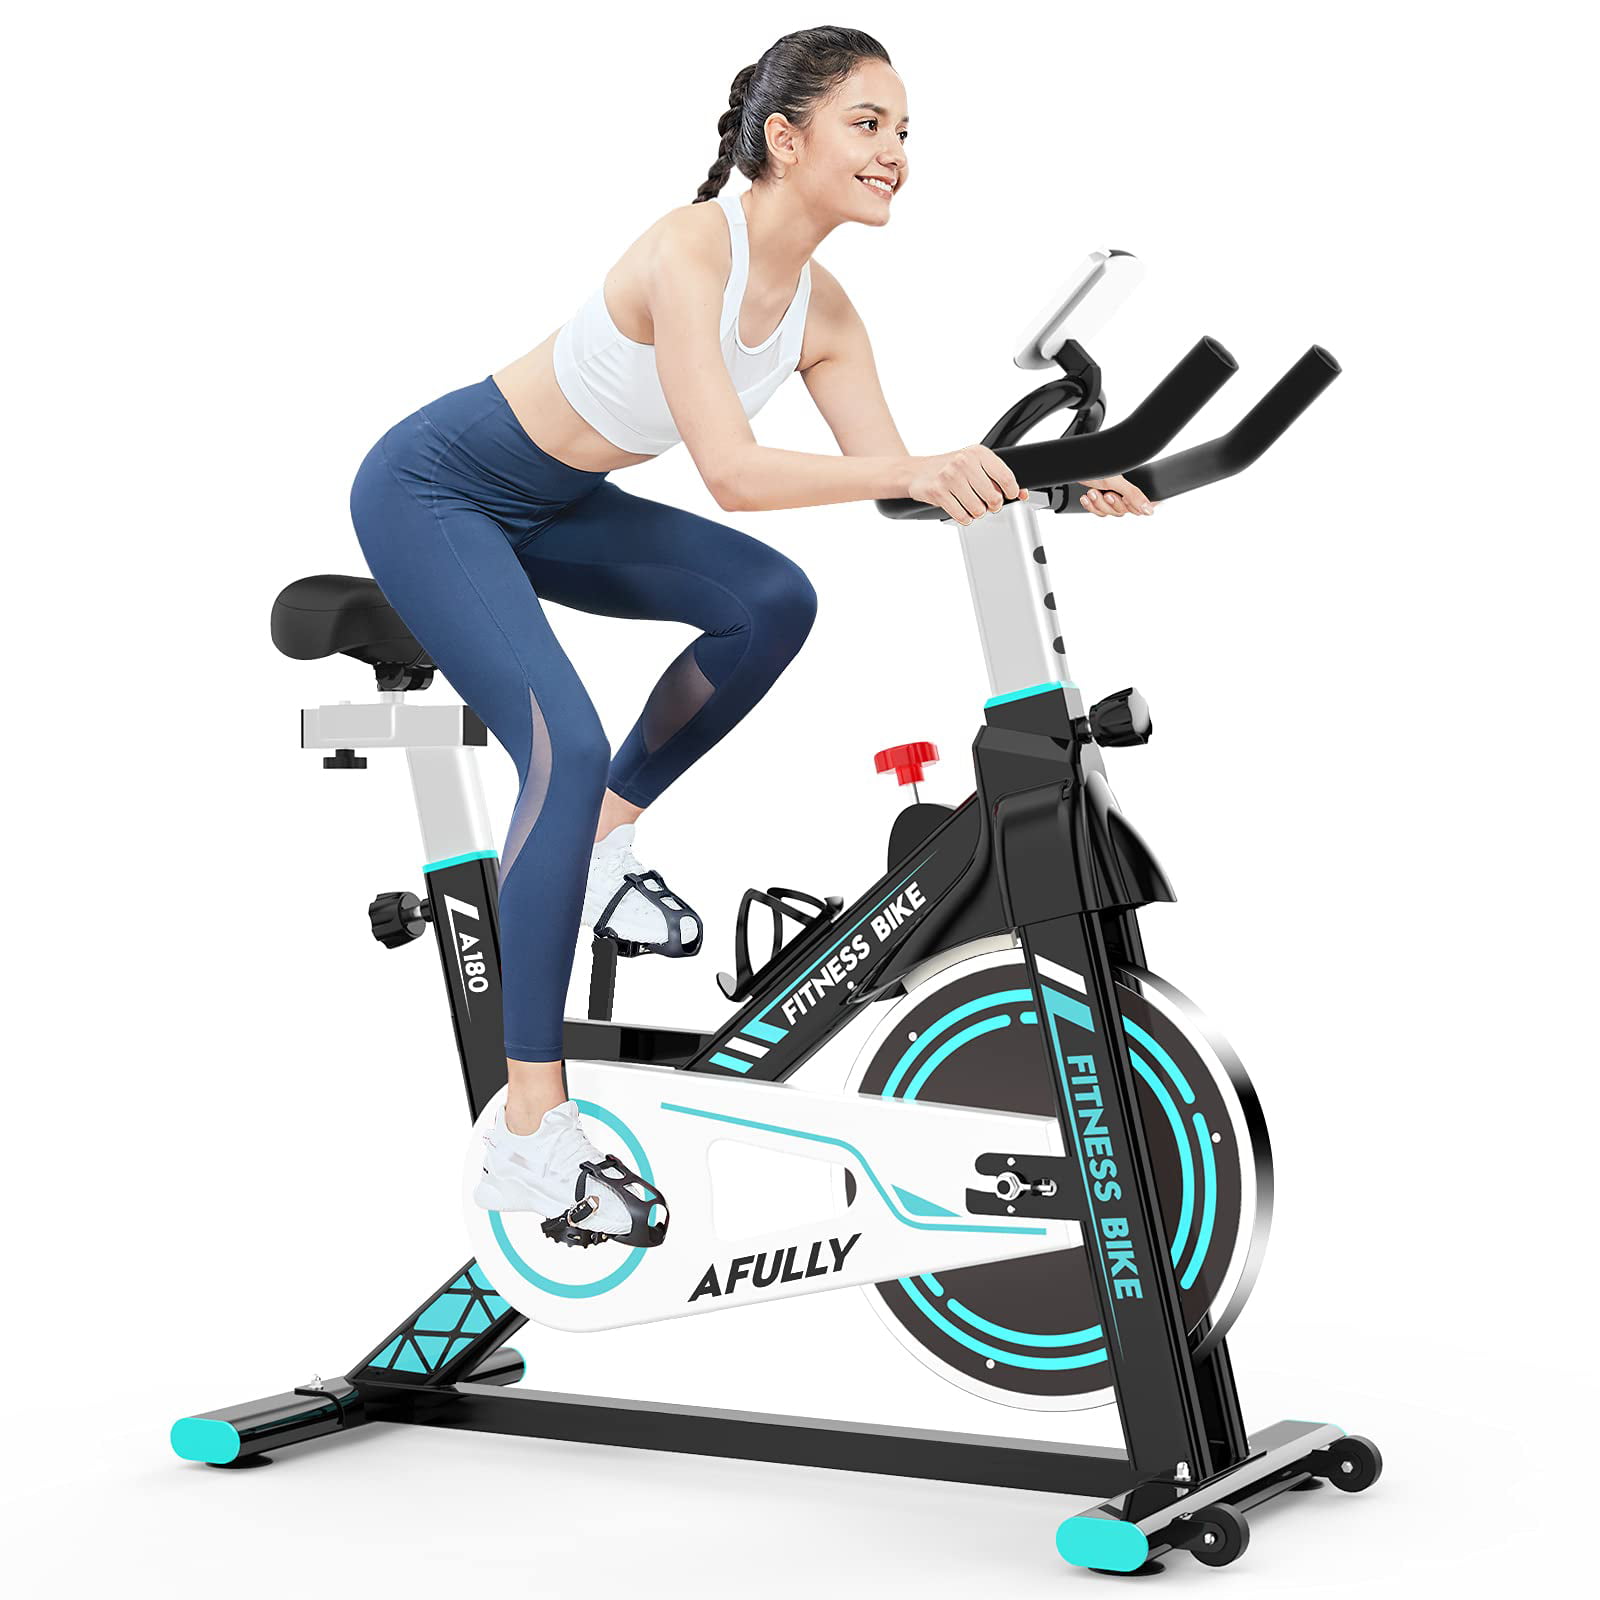 Belt Drive Indoor Cycling Bike Details about   pooboo Exercise Bike Stationary Bike LCD Displa 